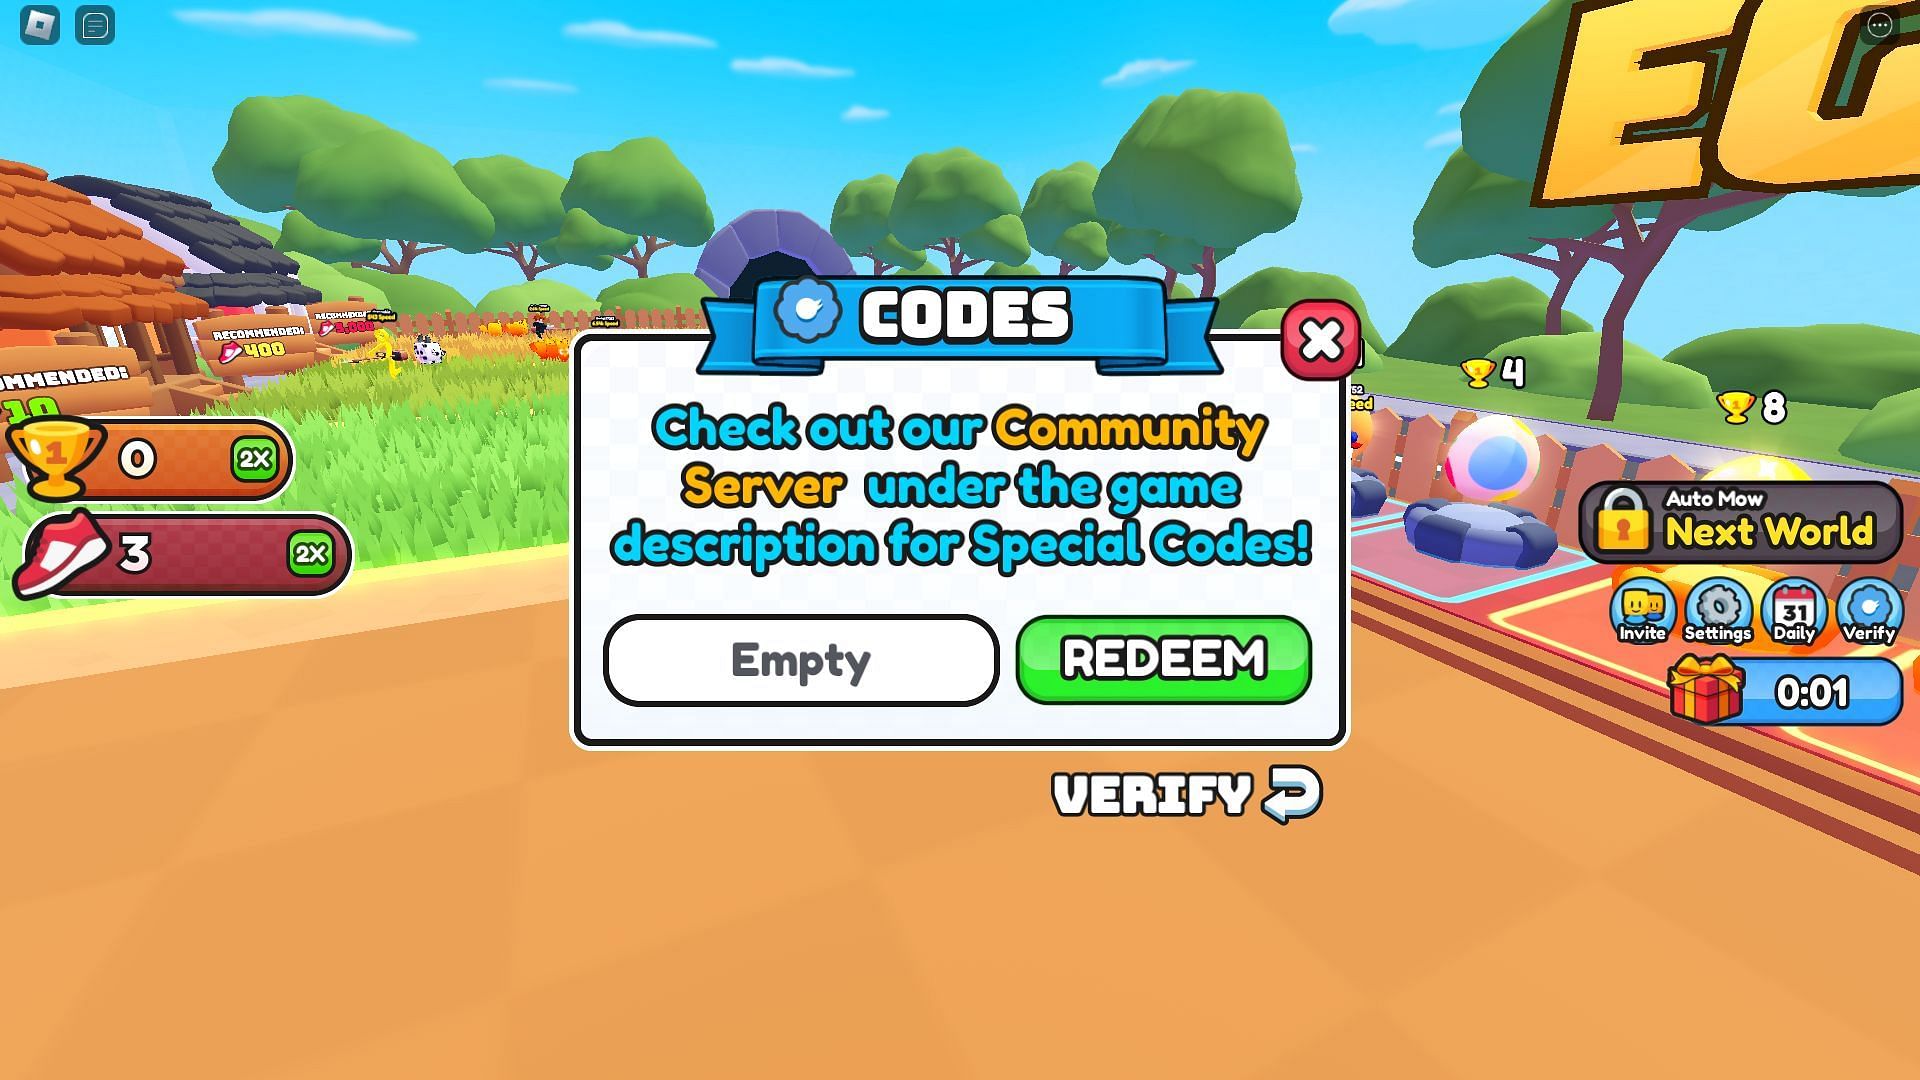 Active codes for Mowing Simulator (Image via Roblox)